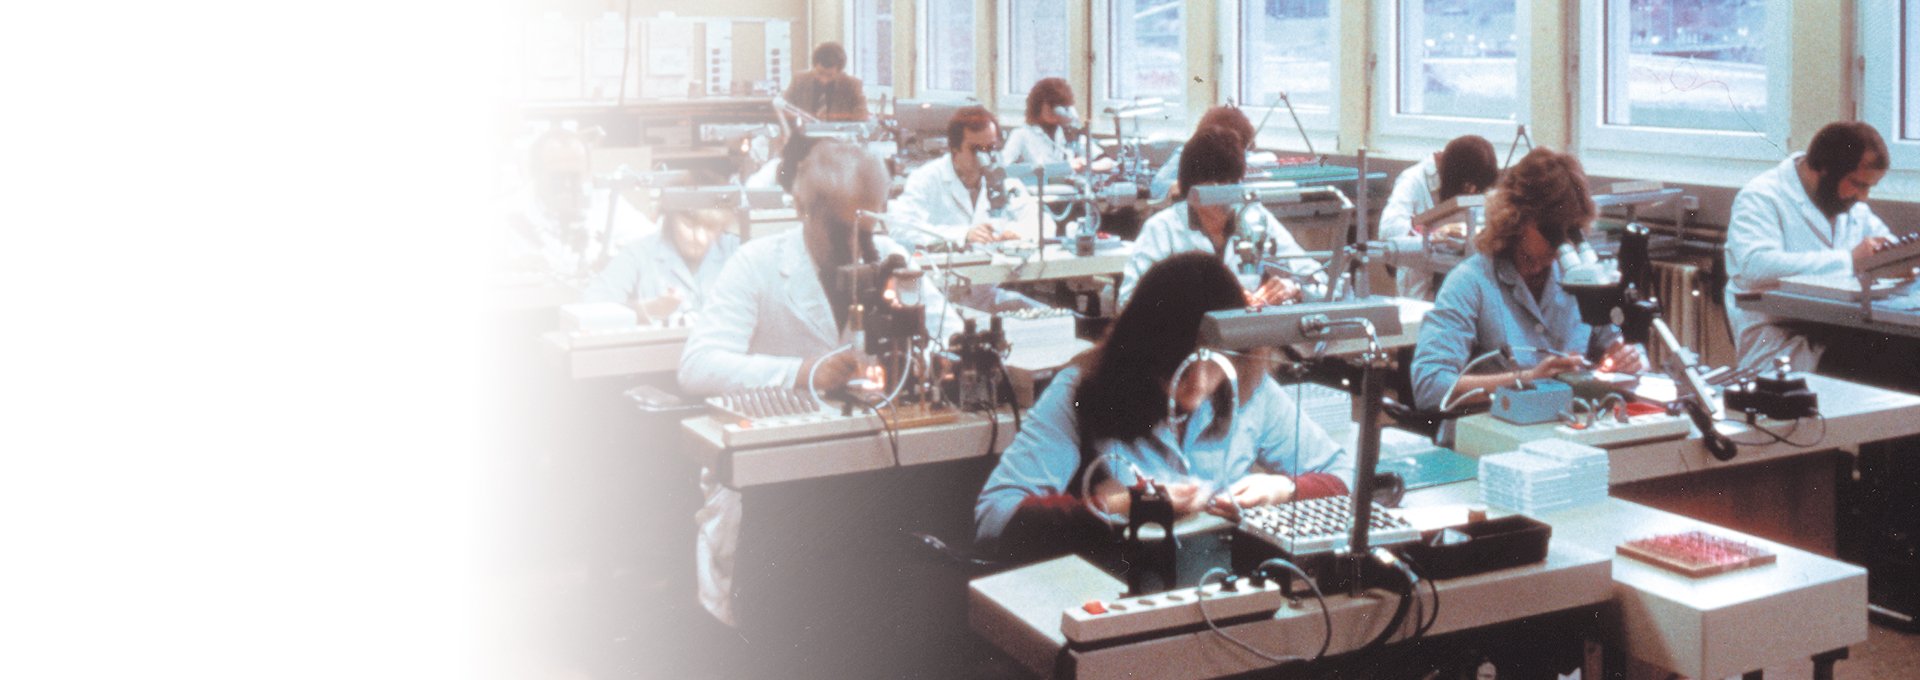 Old photo of a room full of dedicated workers in labcoats working on Bernafon hearing aid production, 1989